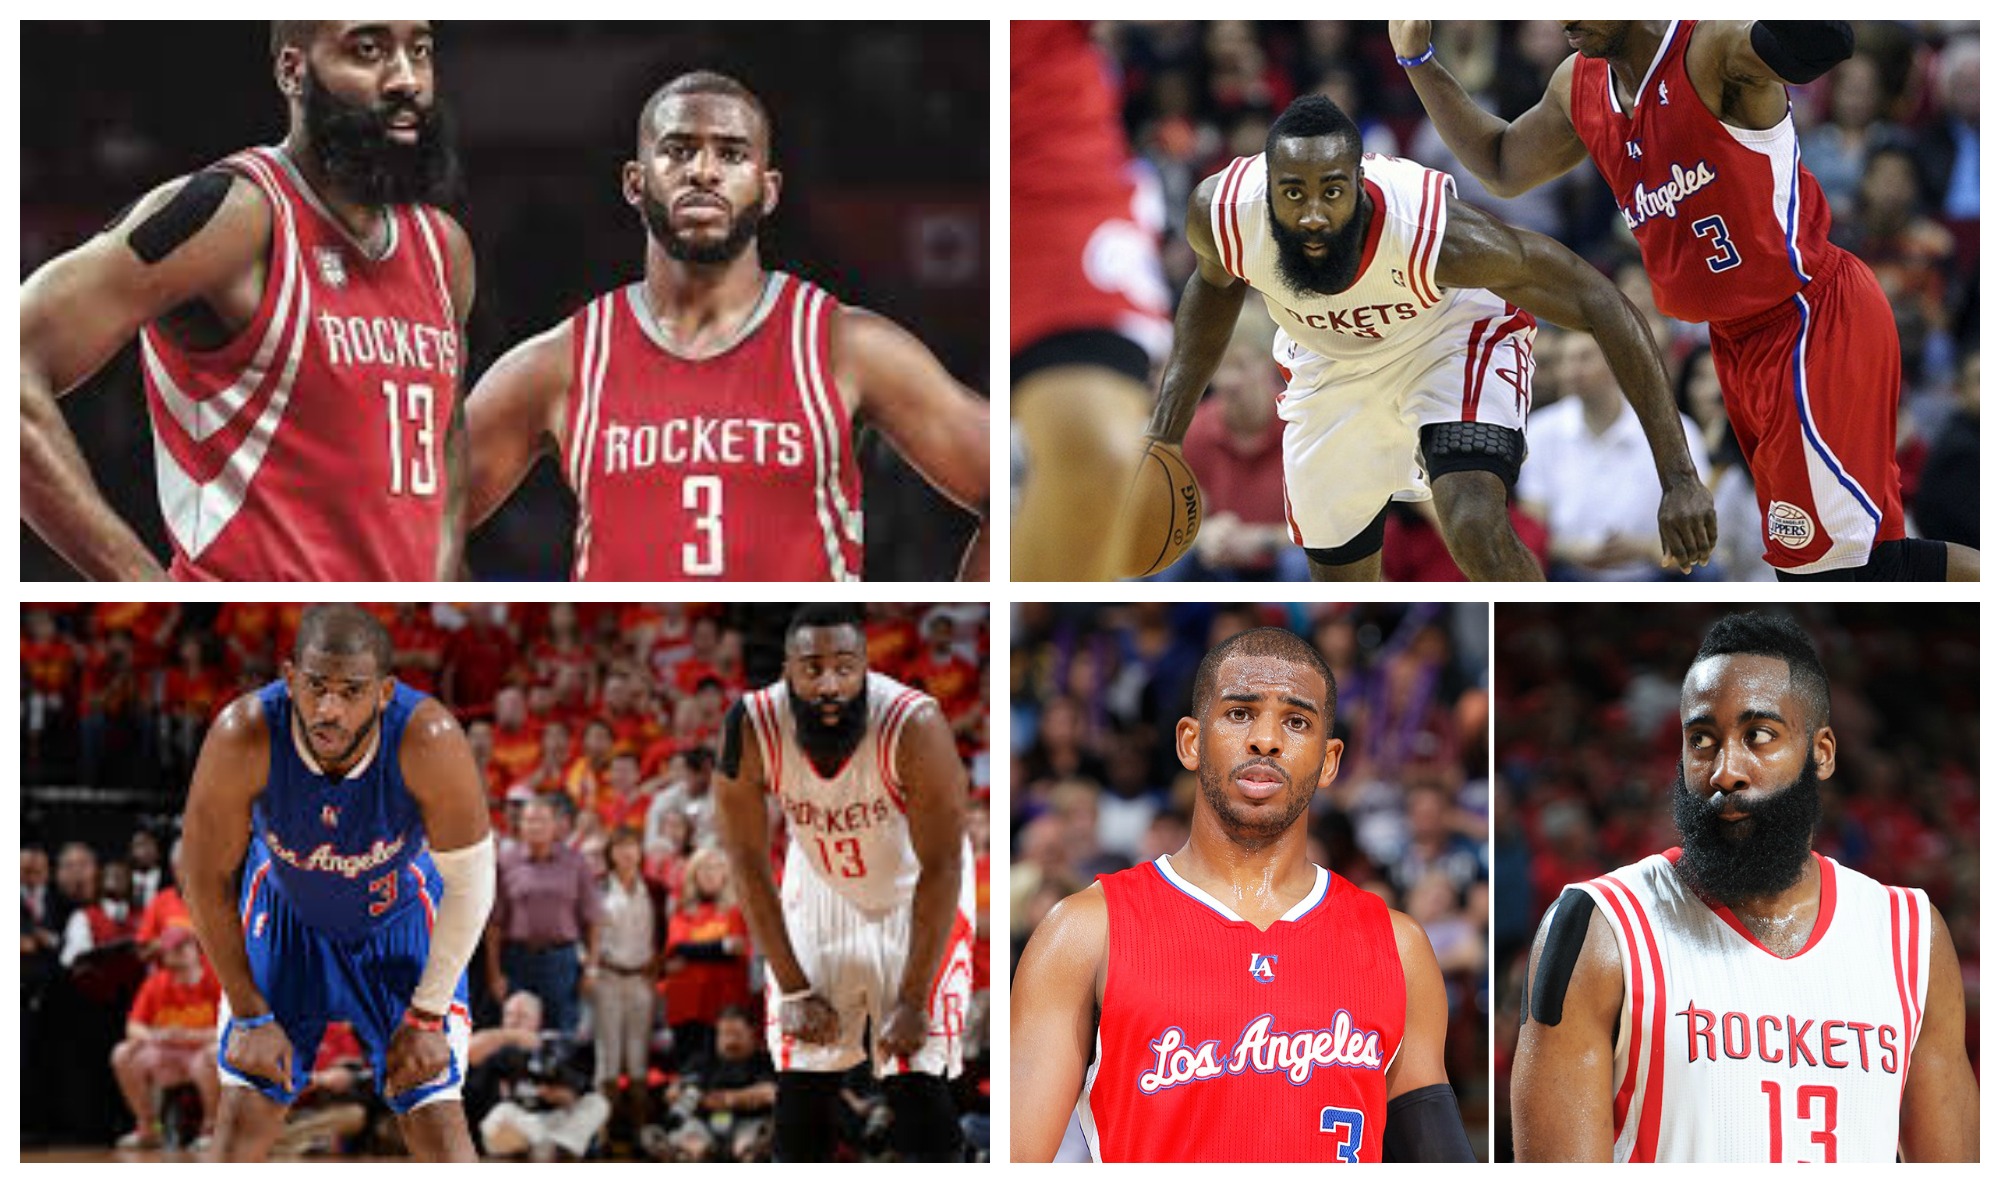 Will The Tandem of Chris Paul and James Harden Work for Houston?